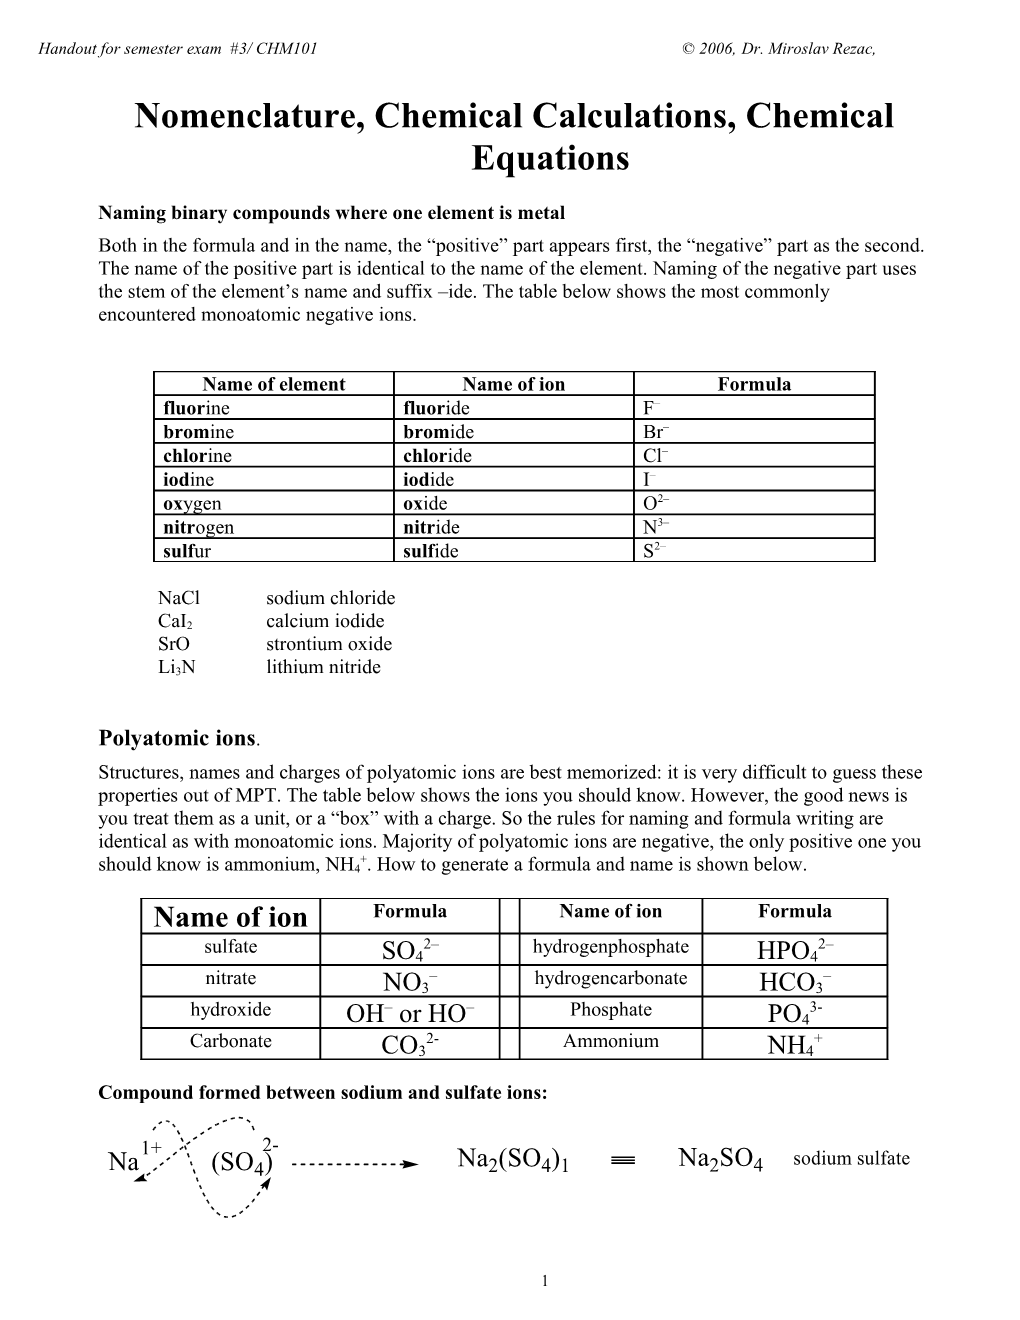 Chemical Calculations, Chemical Equations